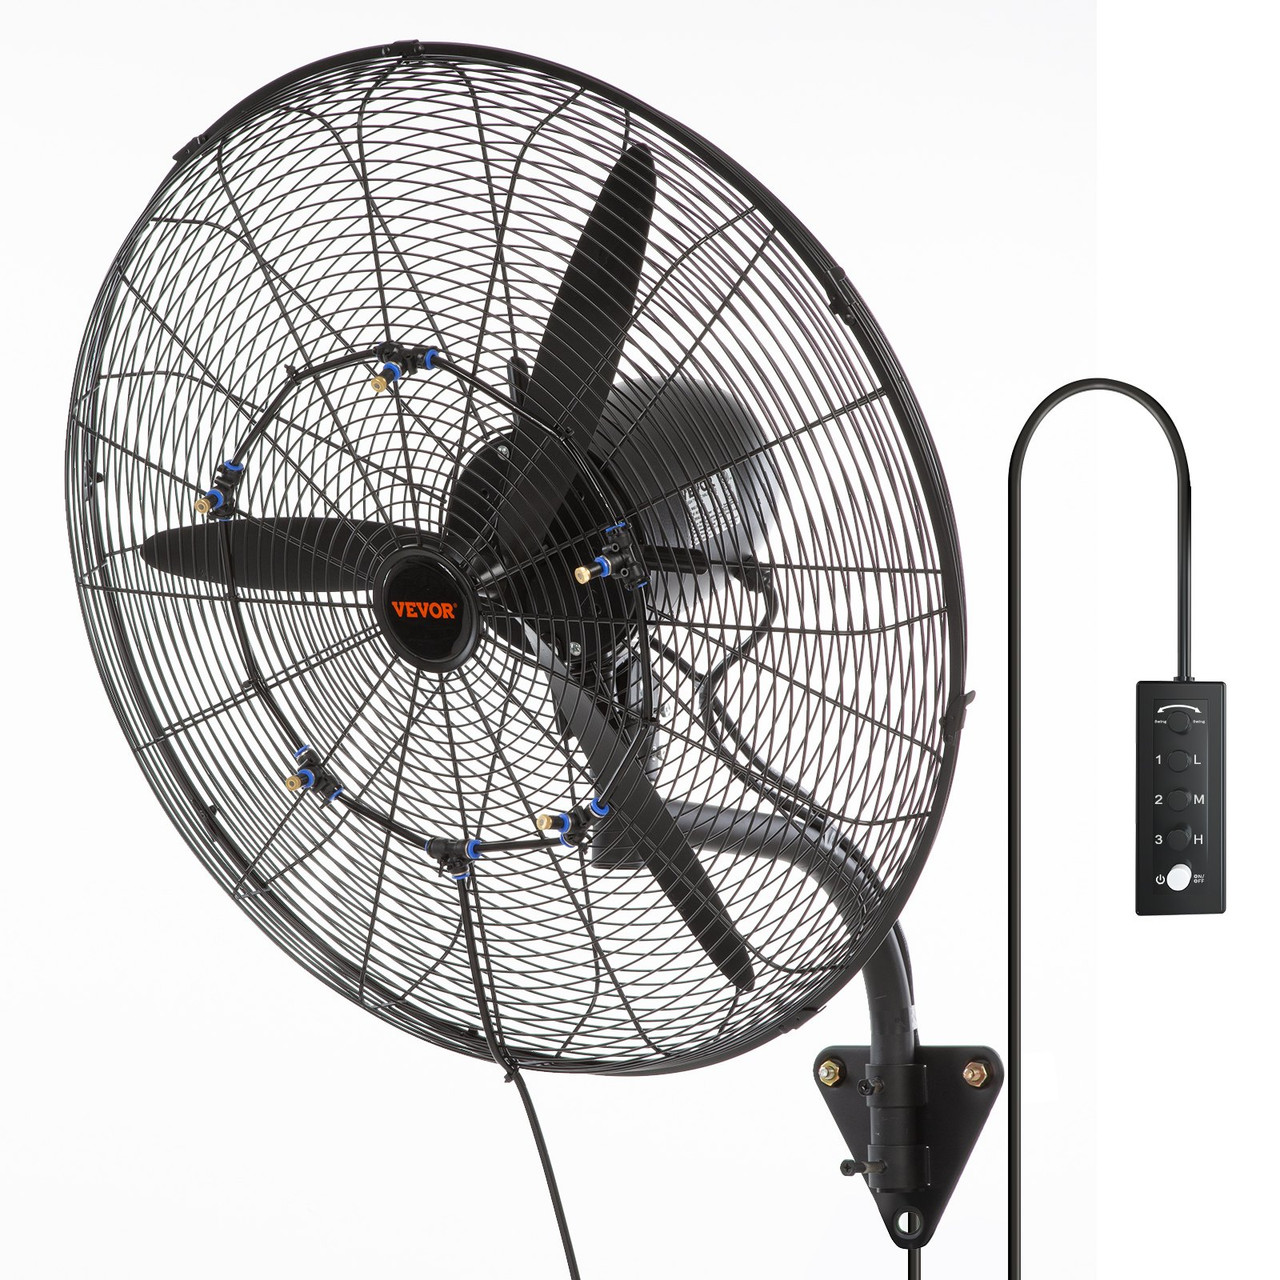 Wall-Mount Misting Fan, 24 Inch, 3-speed High Velocity Max. 7000 CFM, Waterproof Oscillating Industrial Wall Fan, Commercial or Residential for Warehouse, Greenhouse, Workshop, Black, ETL Listed